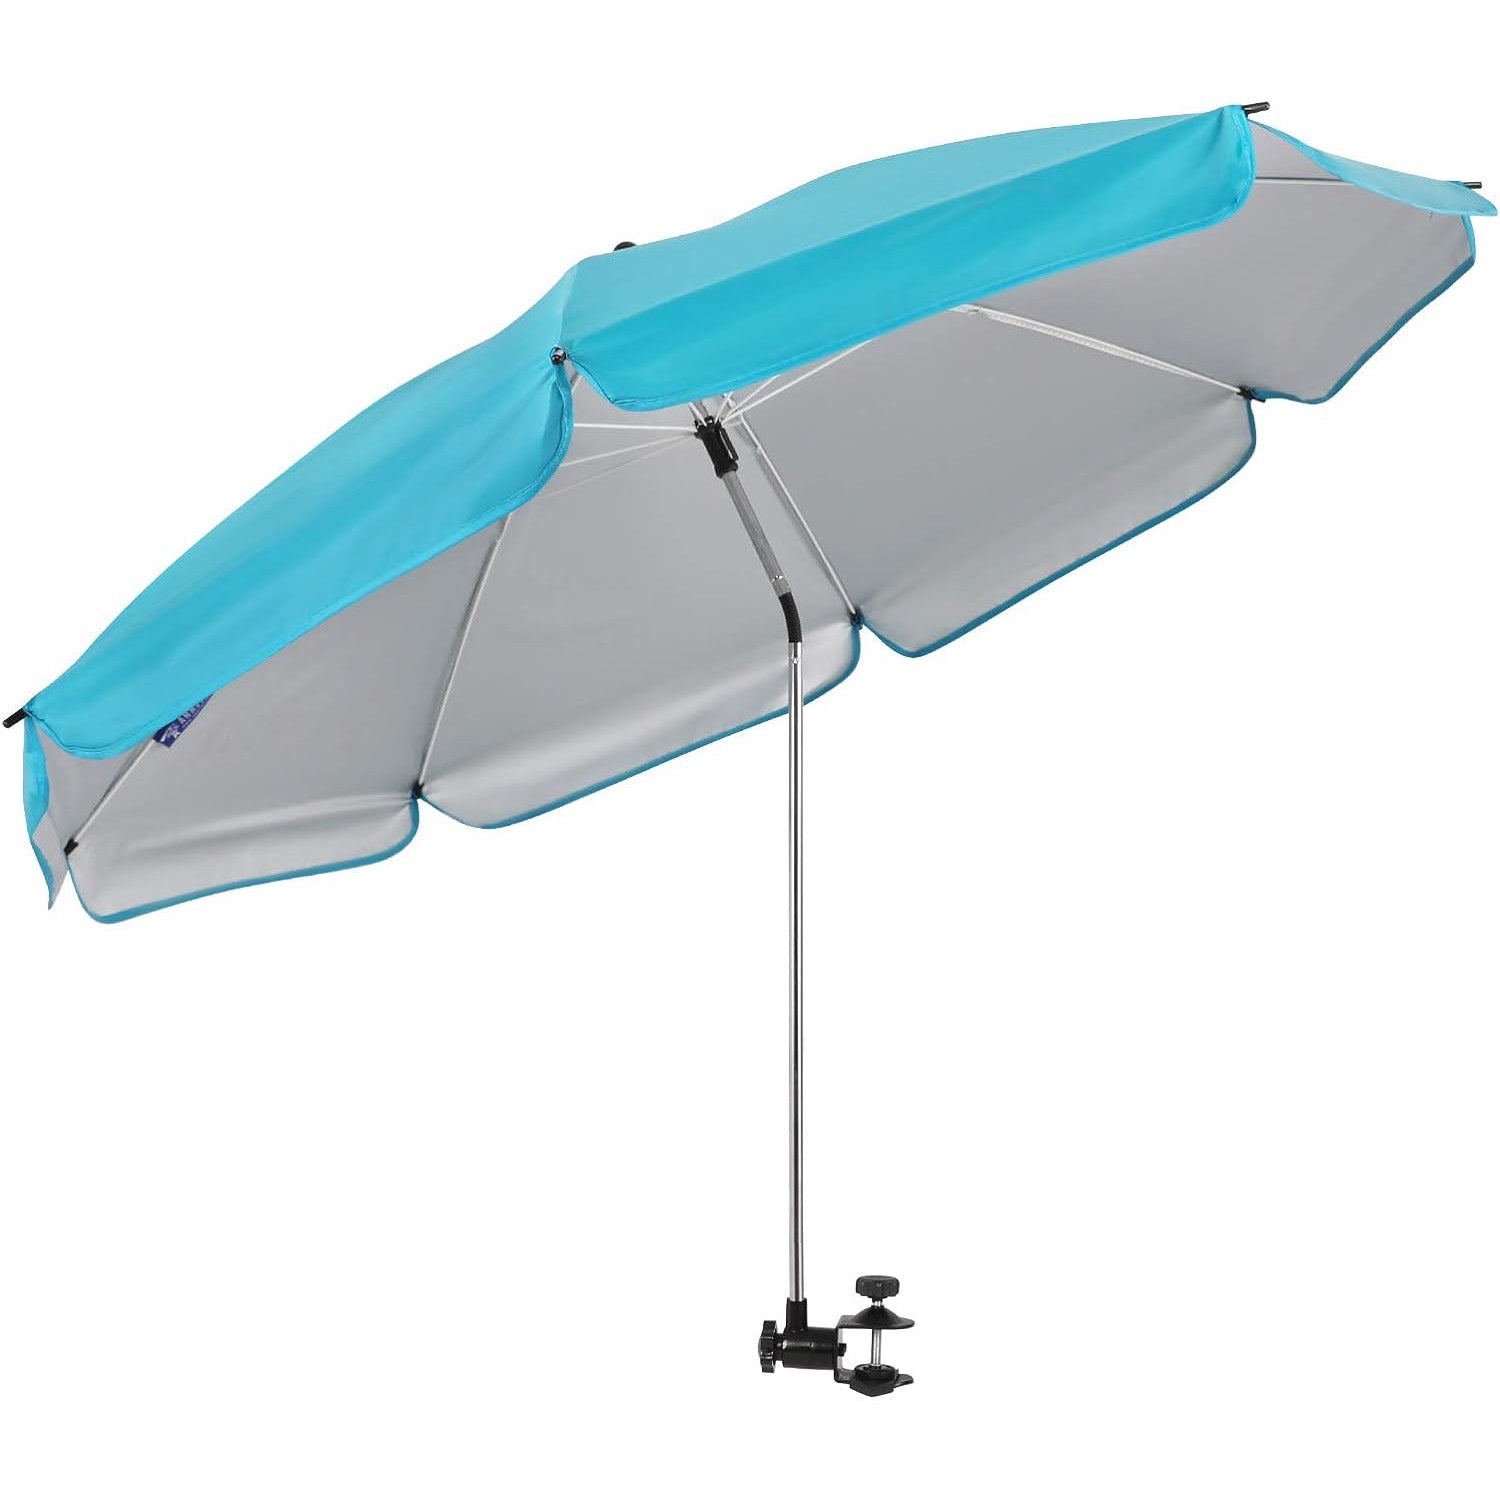 AMMSUN 52 inches XL Chair Umbrella with Universal Clamp Sky Blue